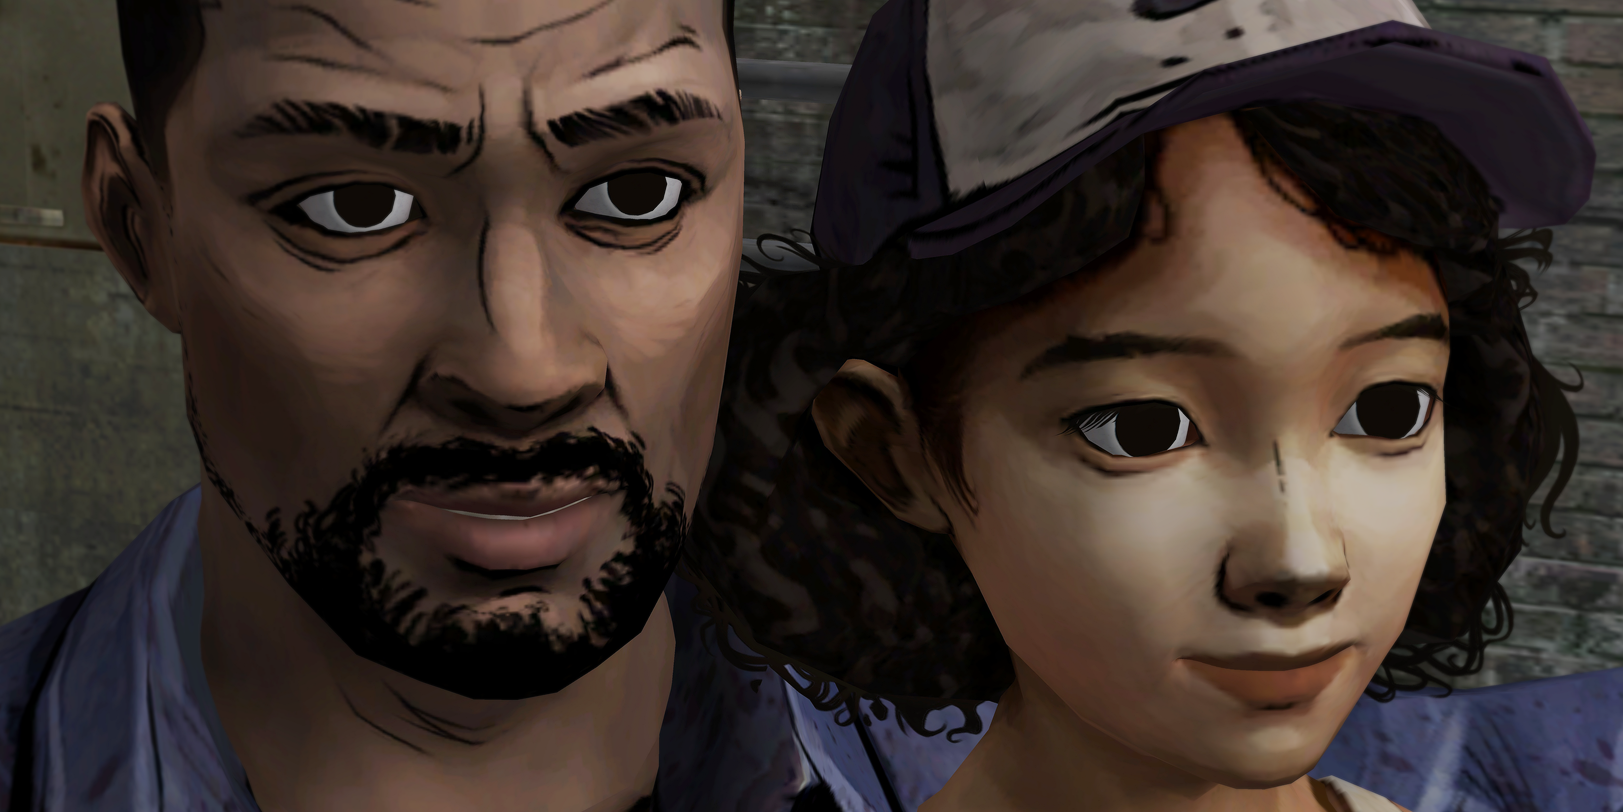 Lee Everett and Clementine Together in The Walking Dead TellTale series 